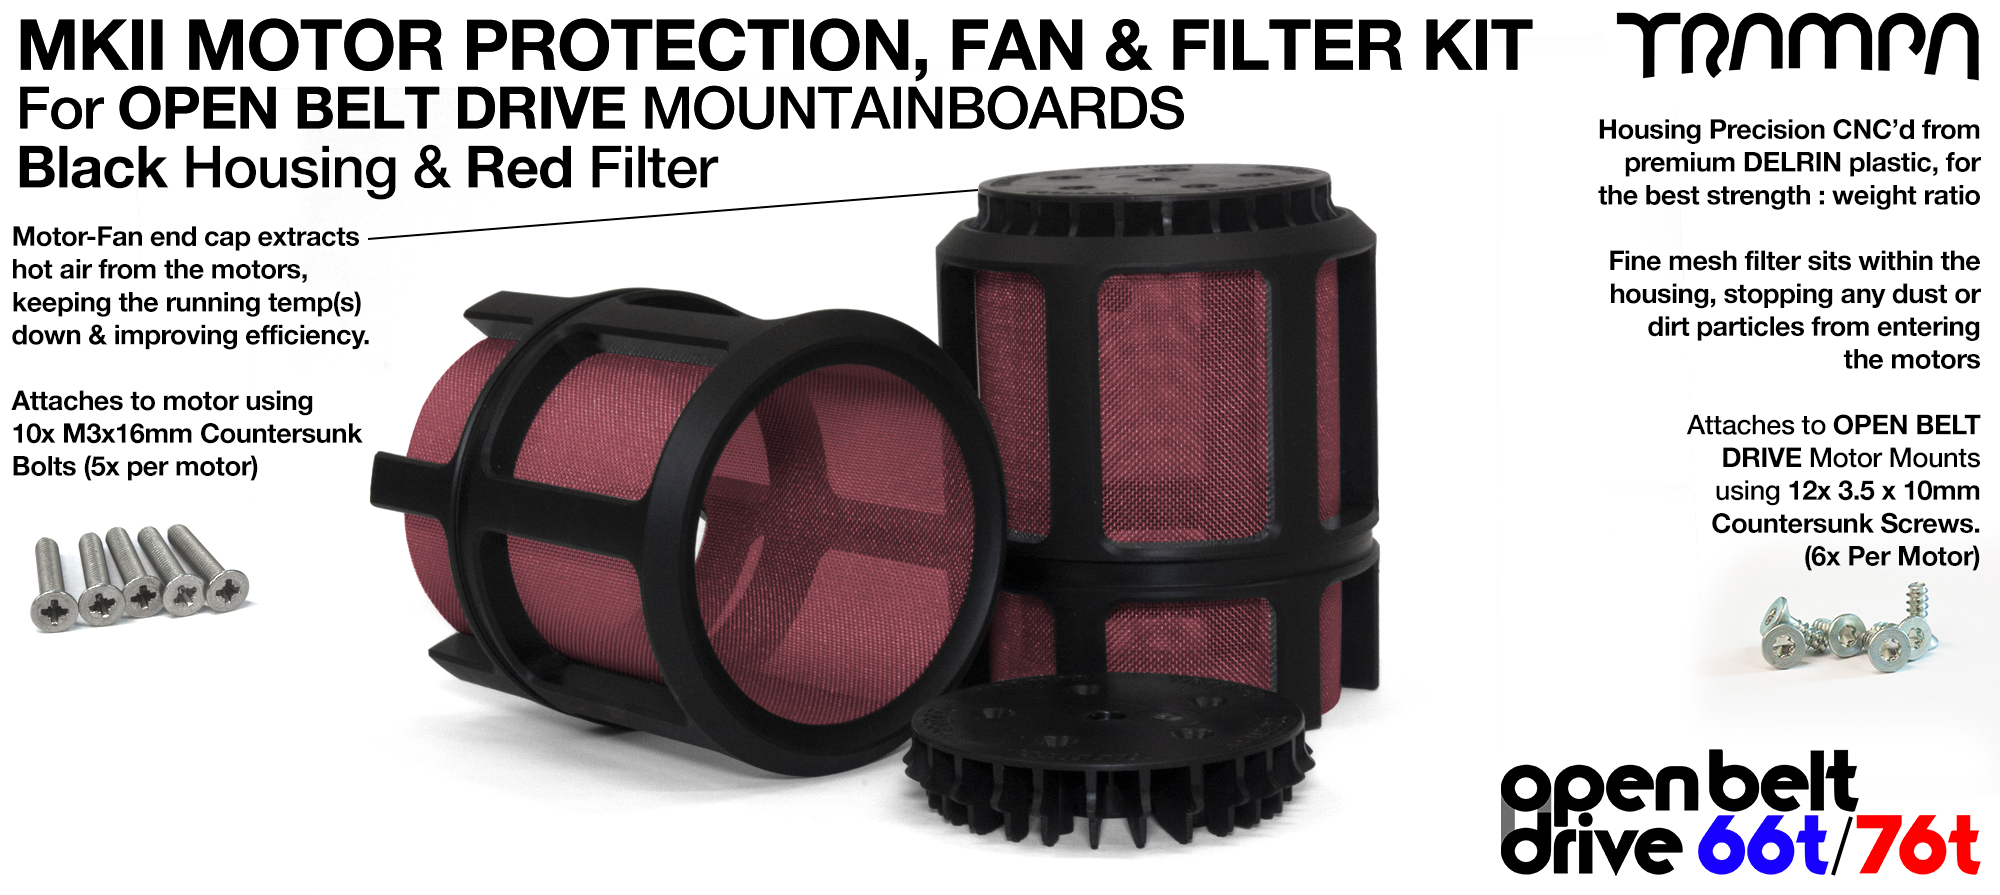 FULL CAGE Motor protection SUPER STRONG DELRIN Plastic includes Fan & RED Filter - TWIN